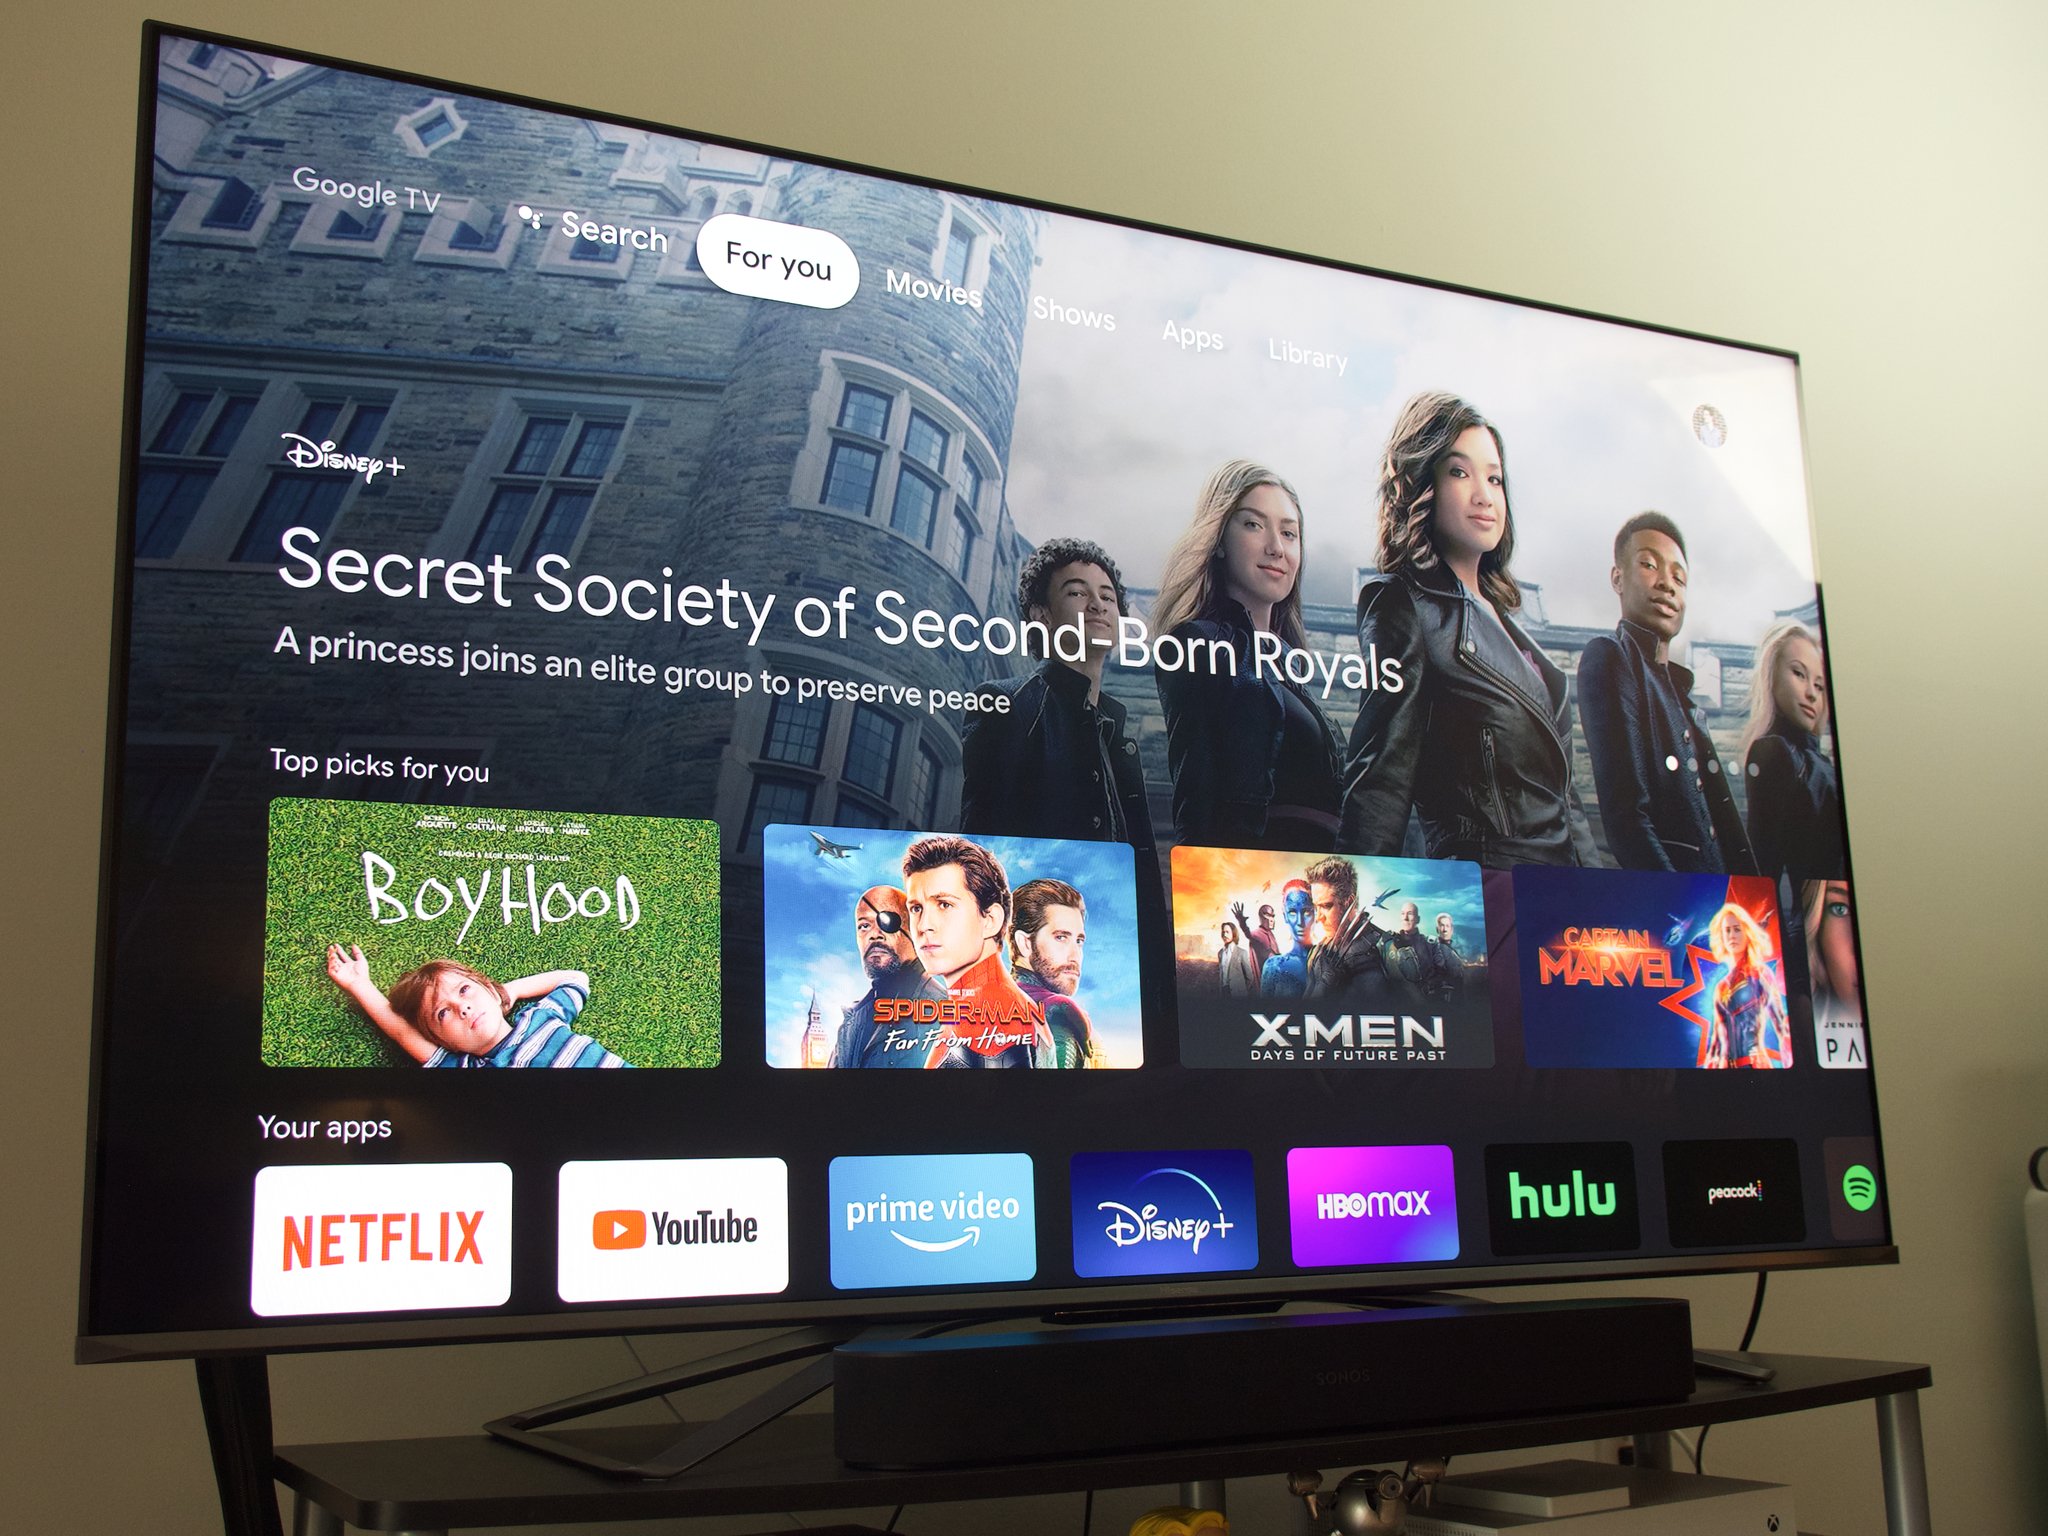 How to manage your Google TV watchlist